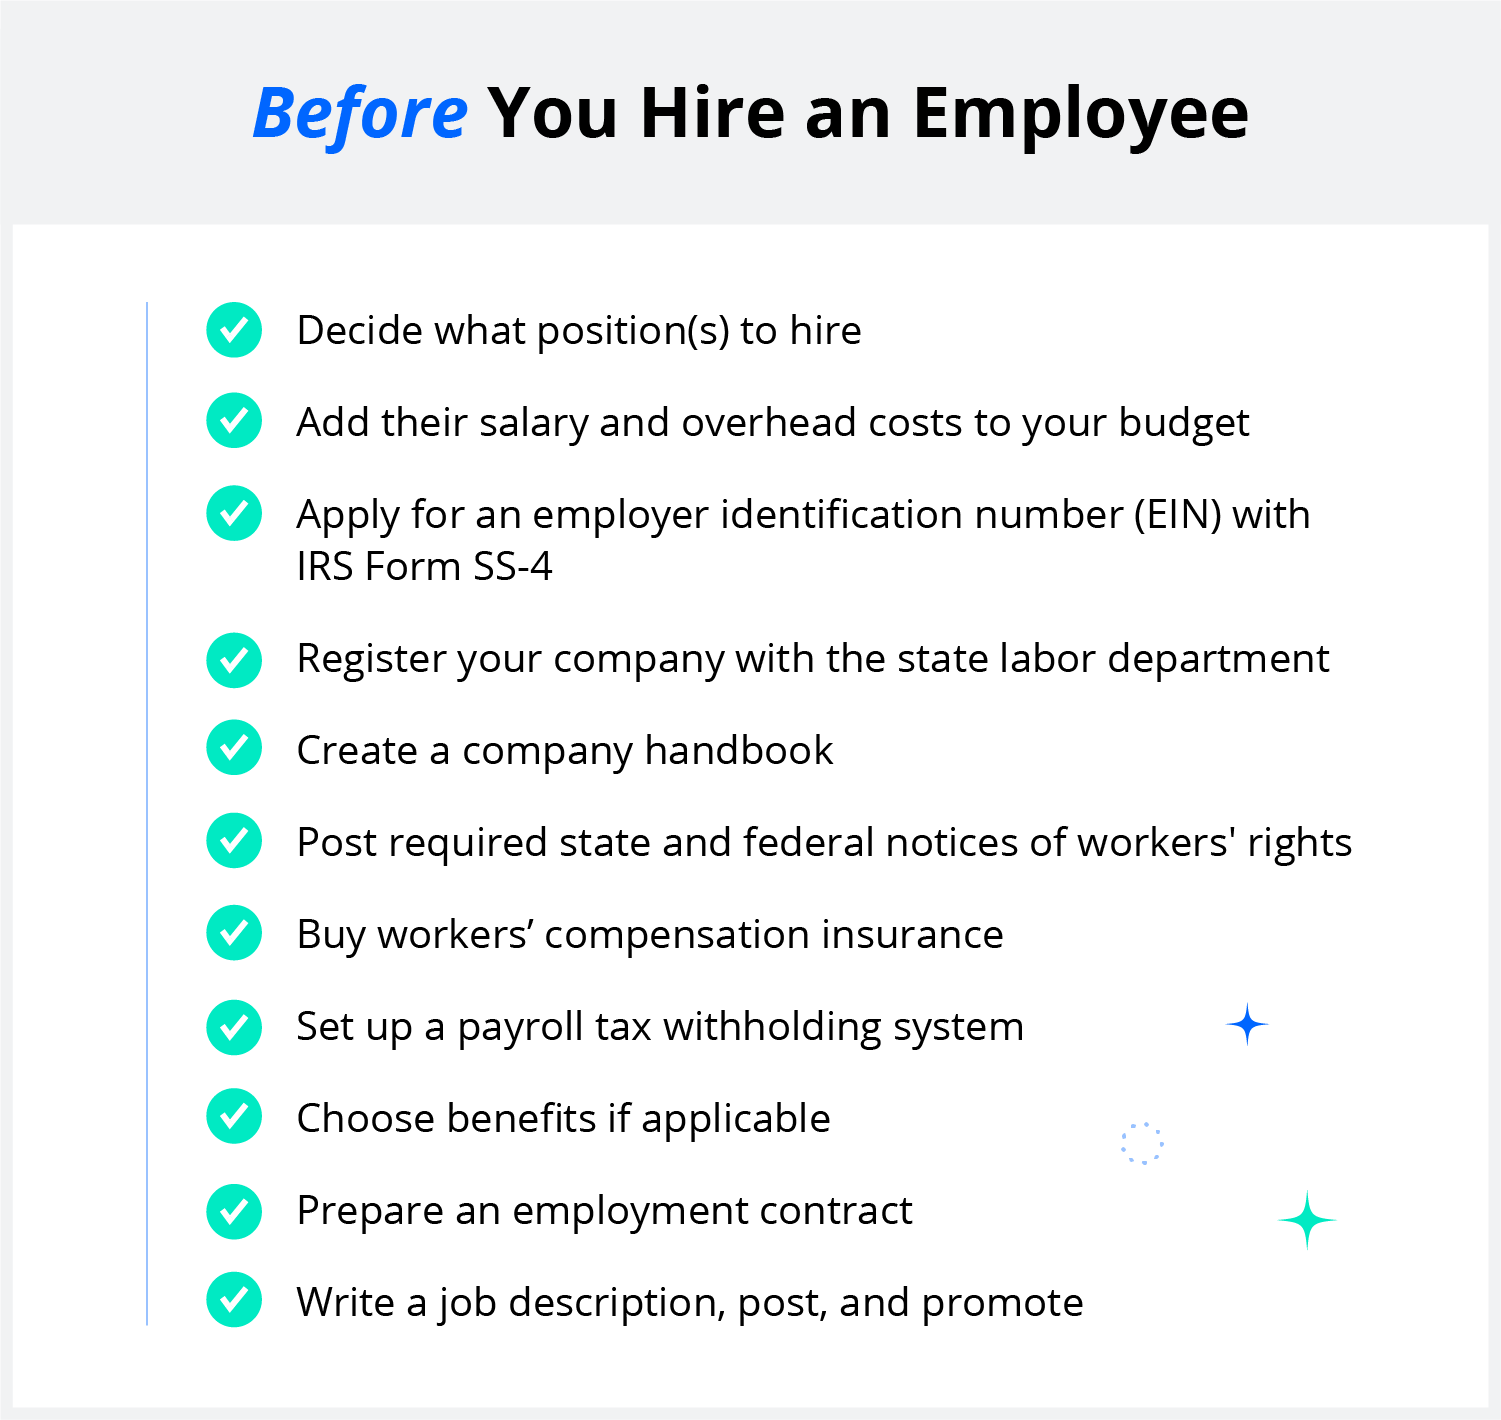 A checklist of tasks to consider before hiring anyone to work for you